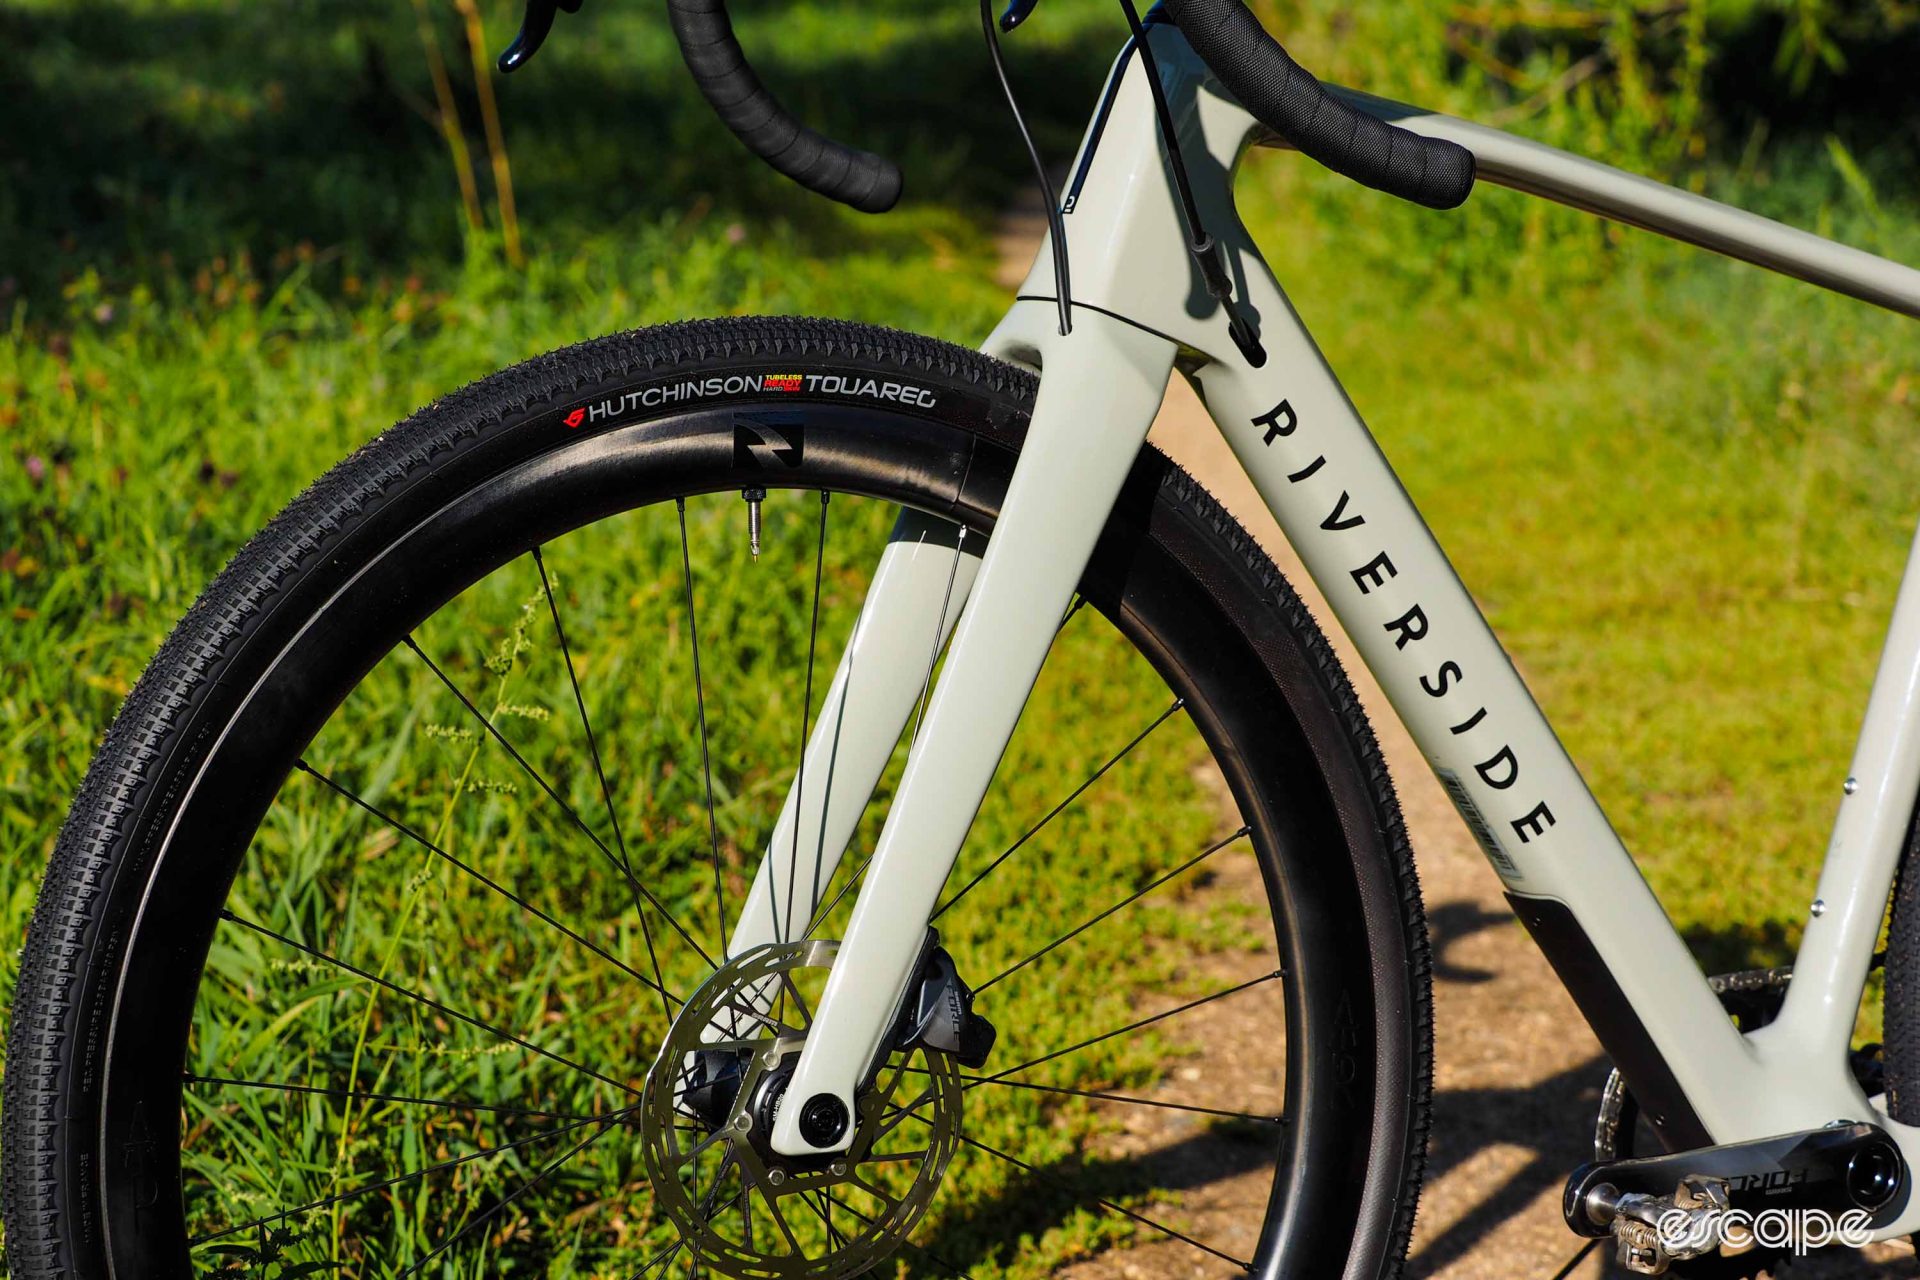 The fork features a large crown that blends with the oversize head tube.